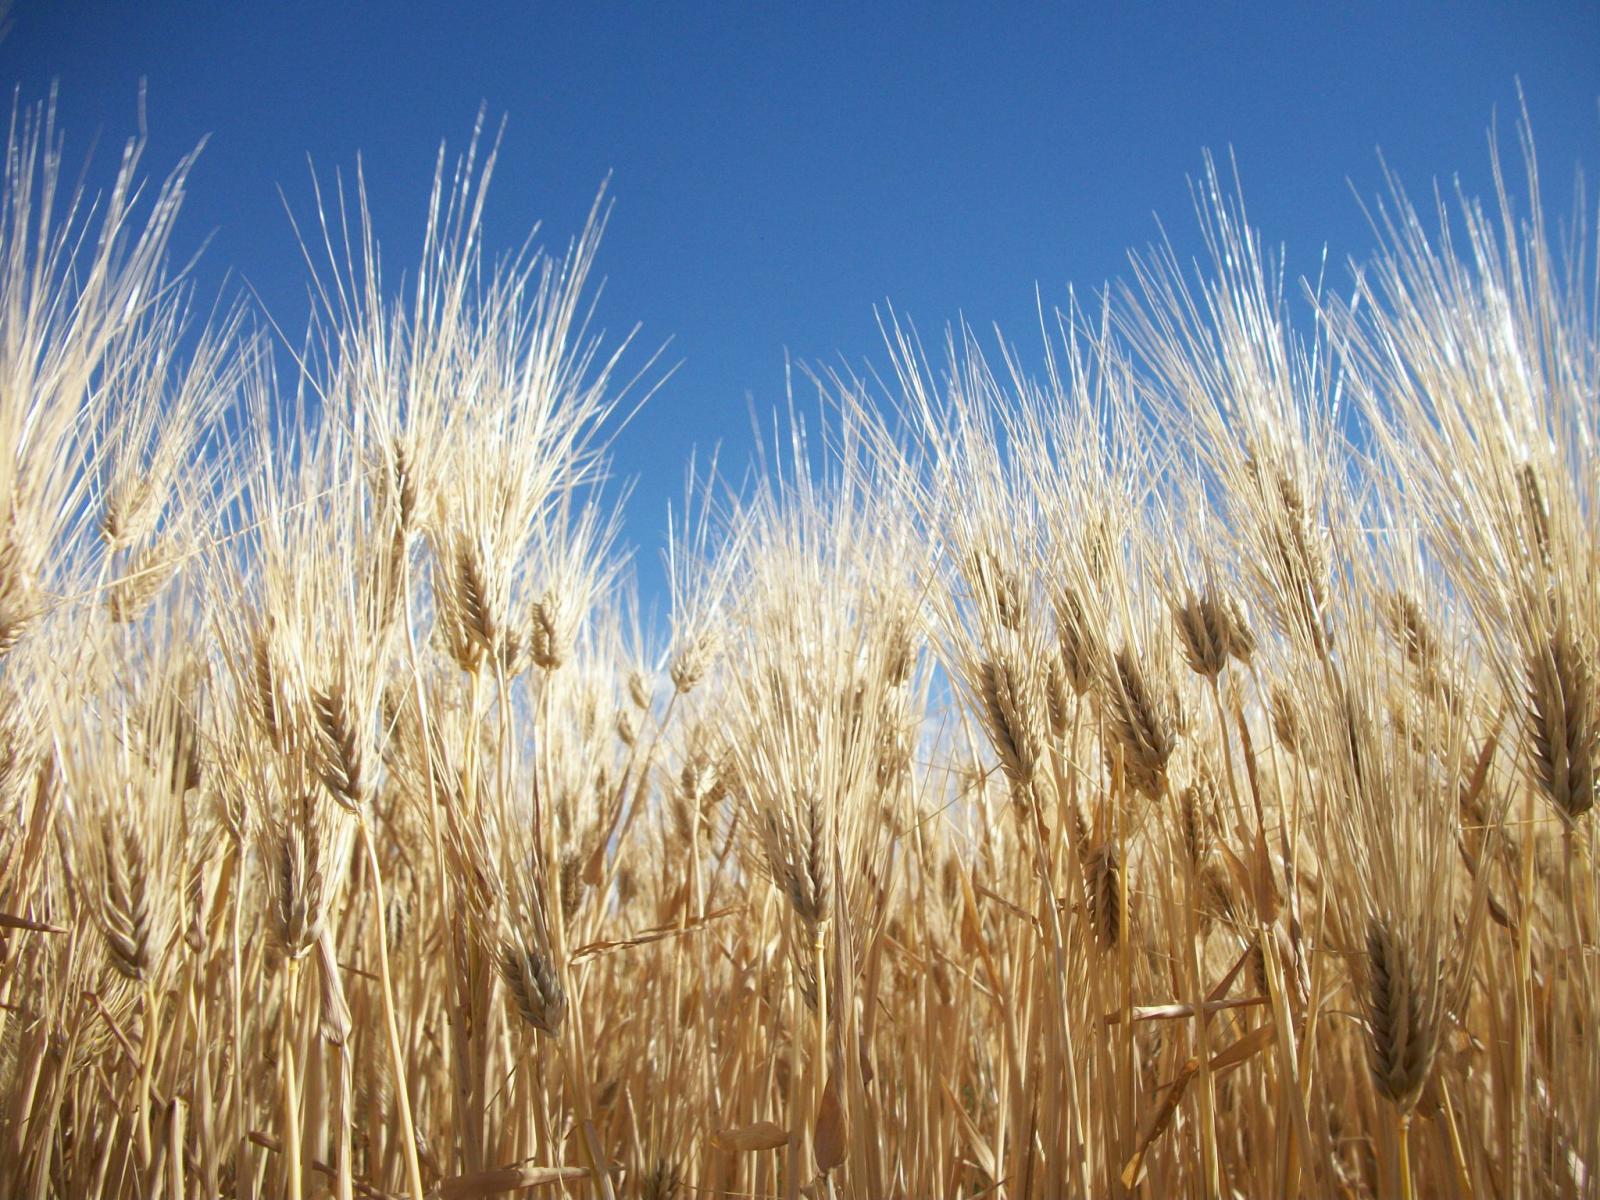 Project aims to develop winter malting barley cultivars adapted to the